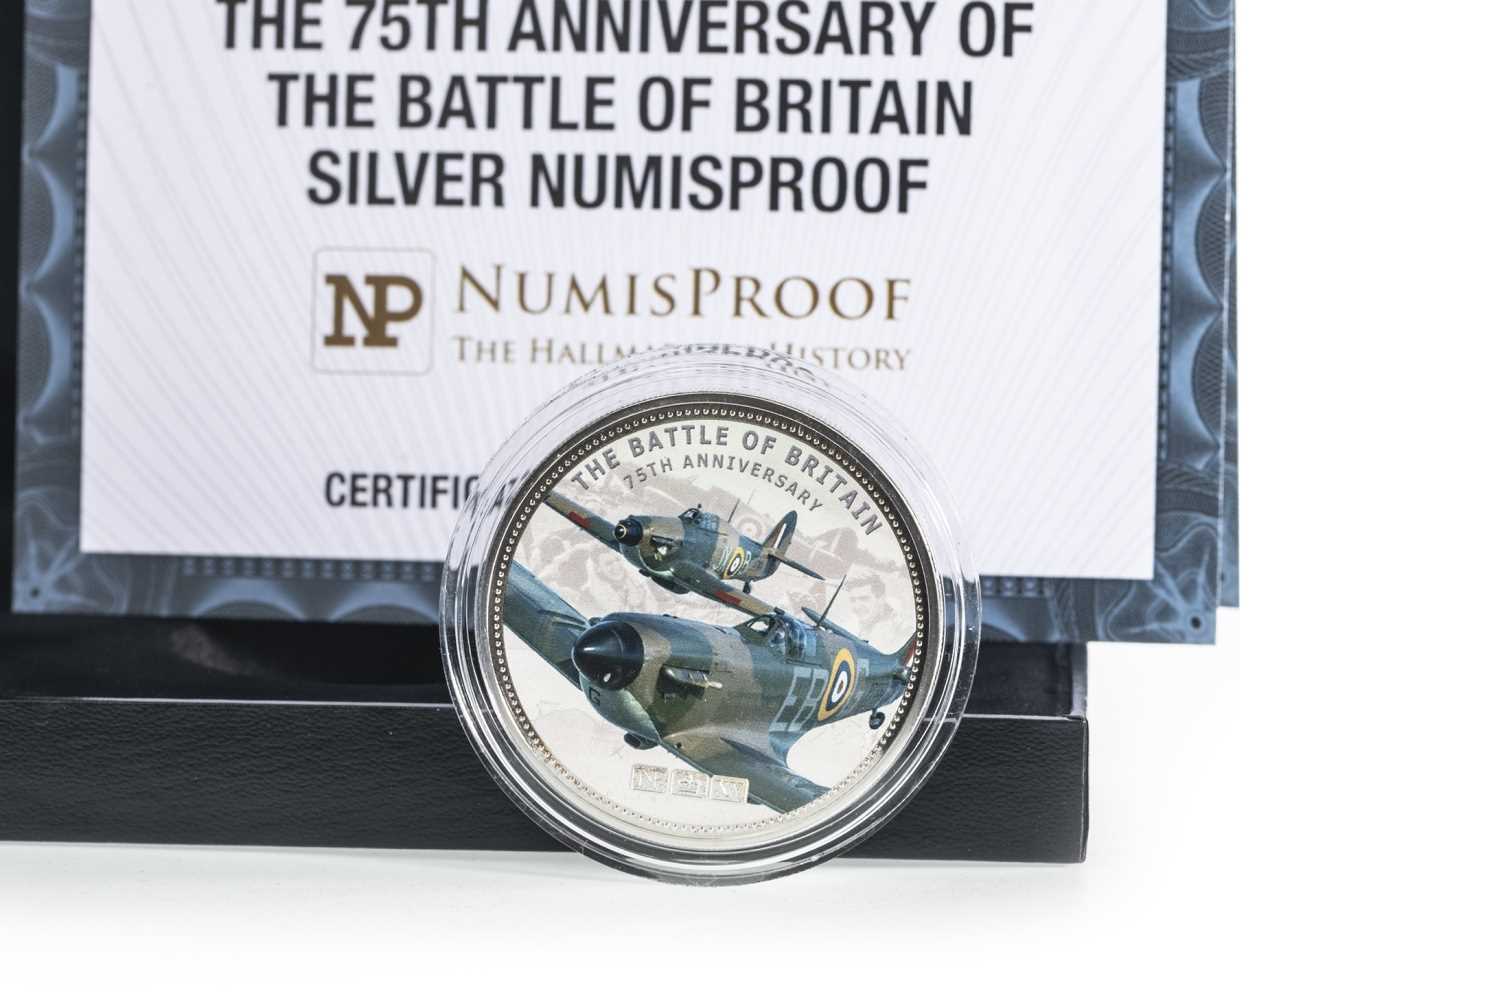 Lot 12 - THE 75TH ANNIVERSARY OF THE BATTLE OF BRITAIN SILVER NUMISPROOF COIN